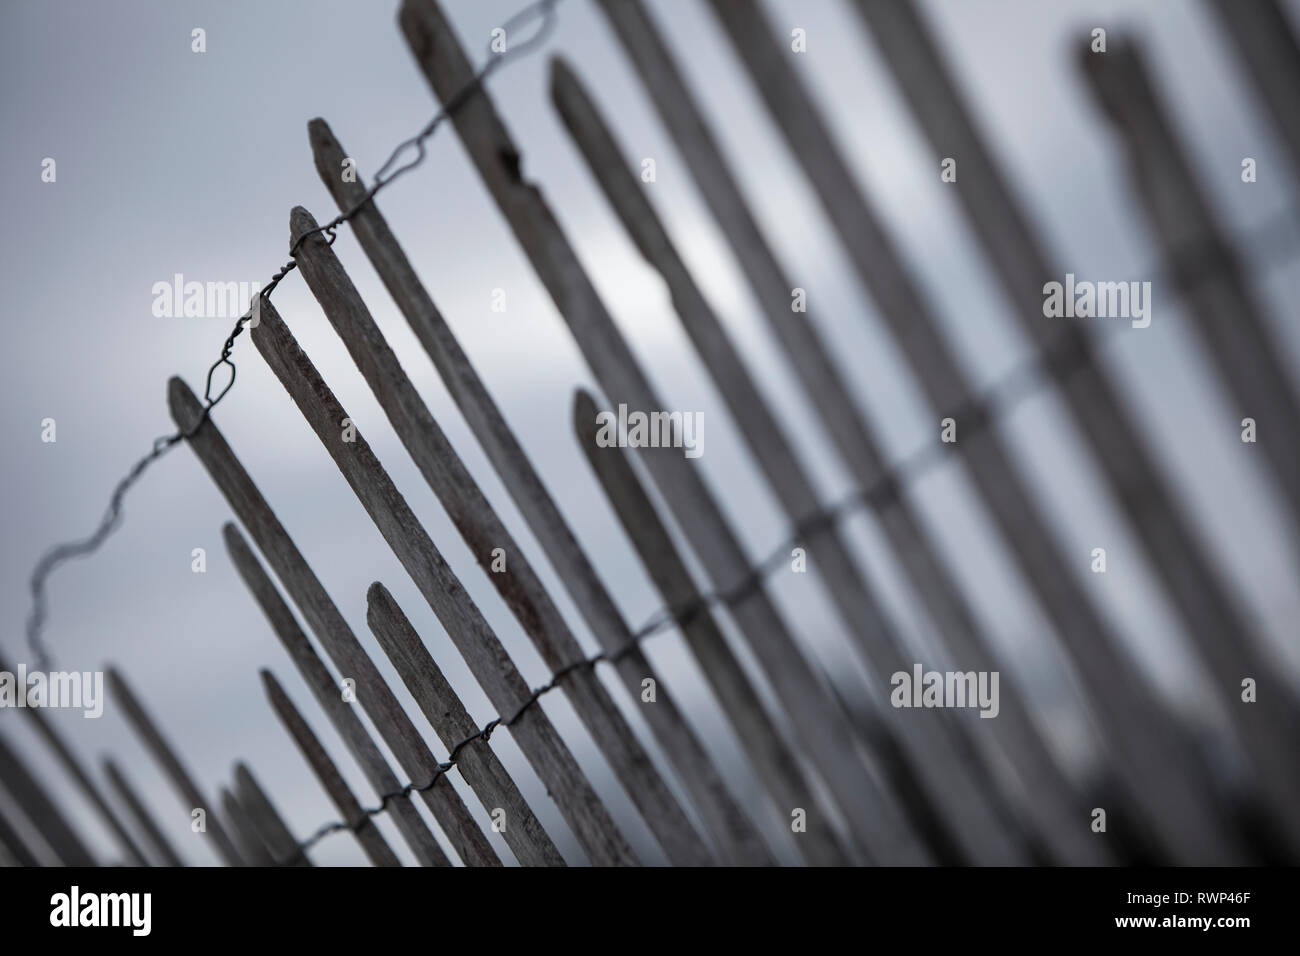 Simple fence with wire and narrow wooden boards that are broken in un-even lengths; Ontario, Canada Stock Photo